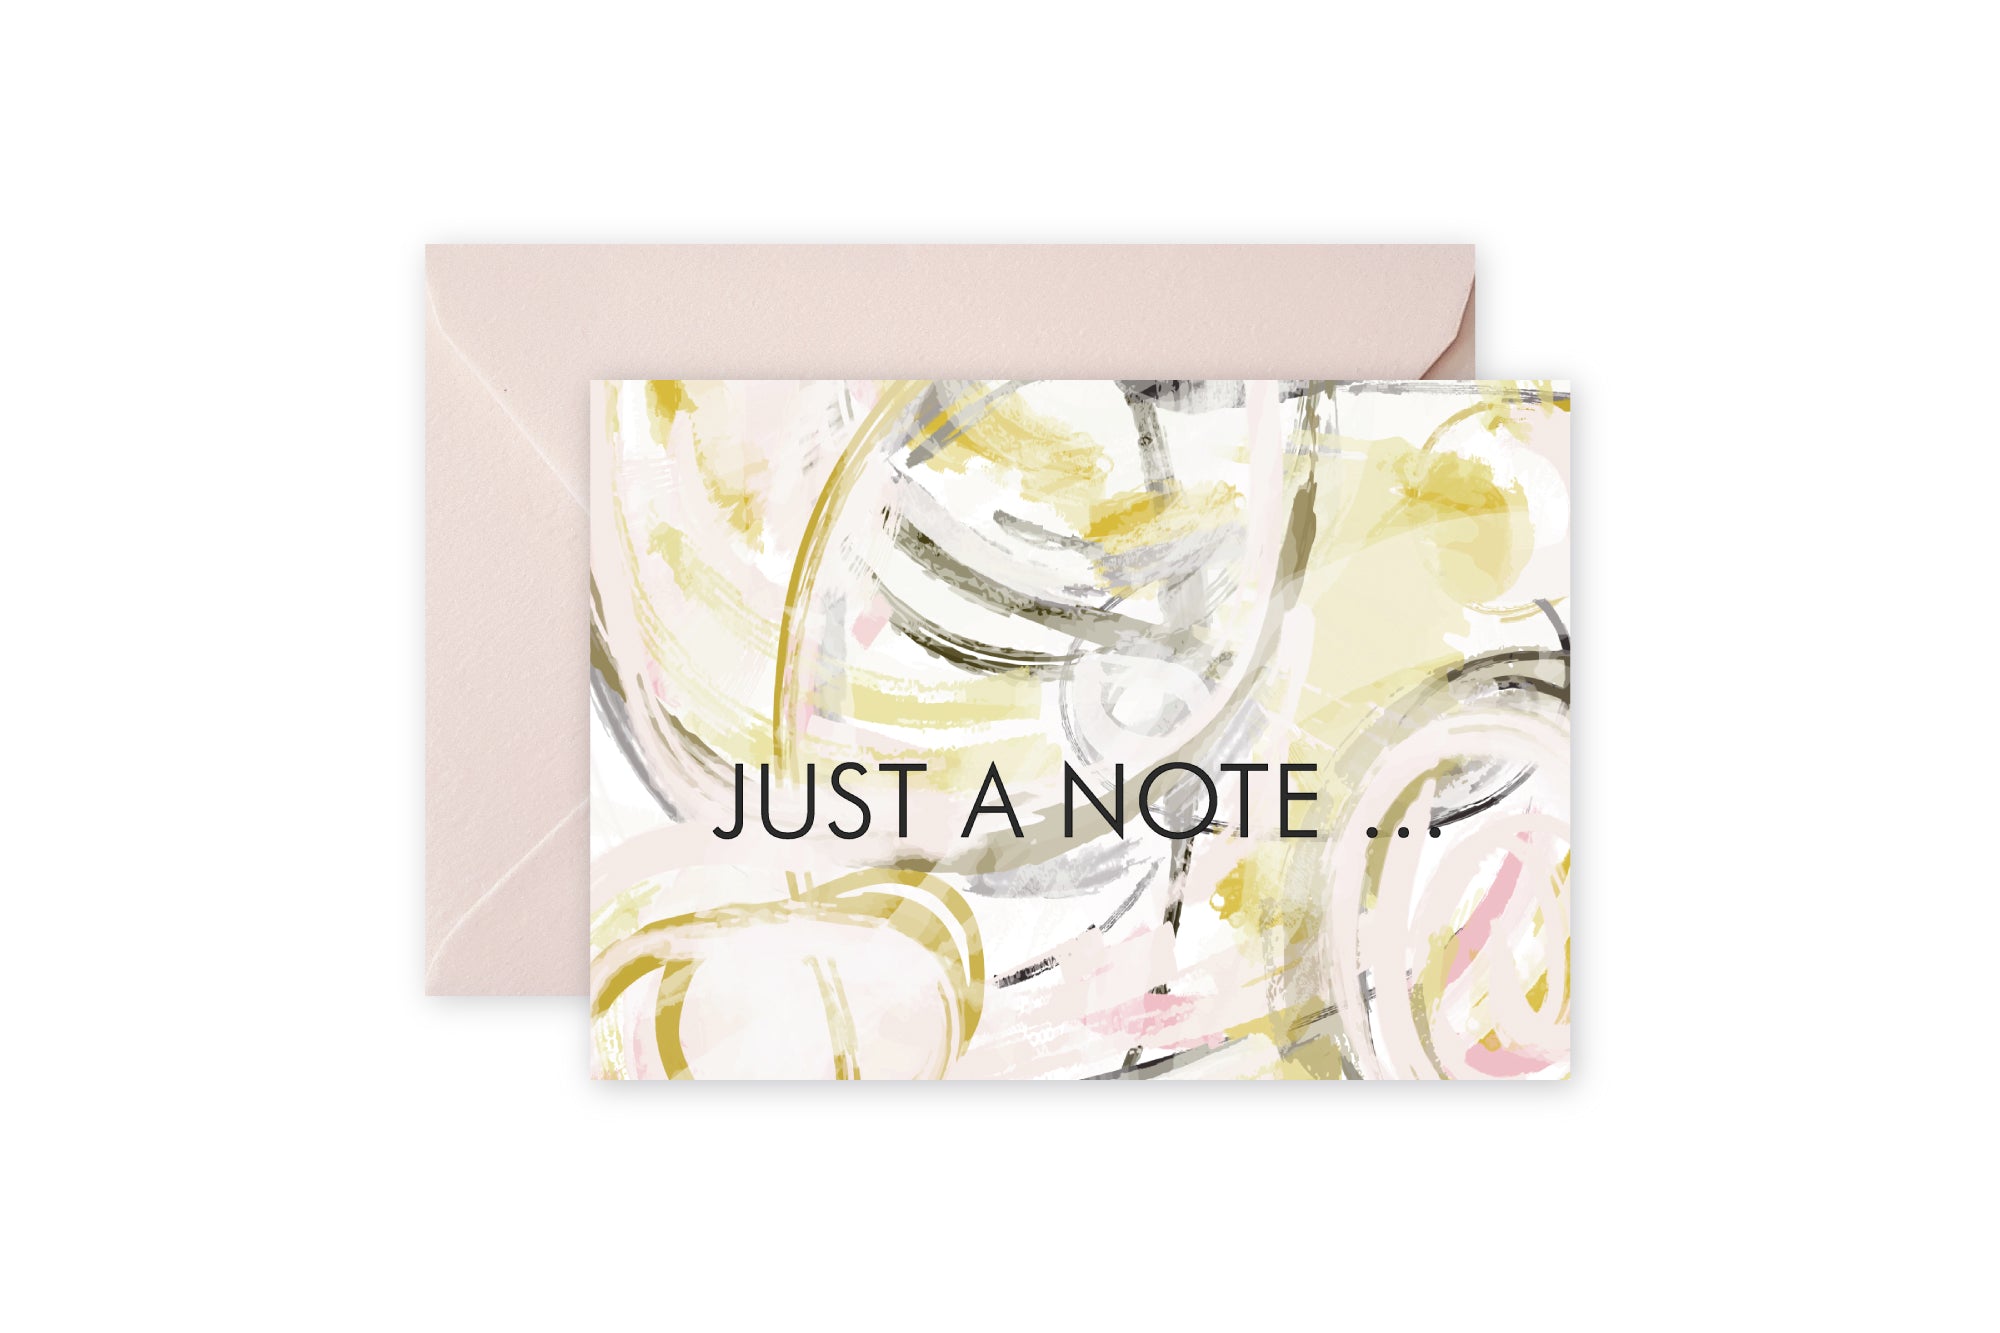 JUST A NOTE Blush Cream Abstract Notecards